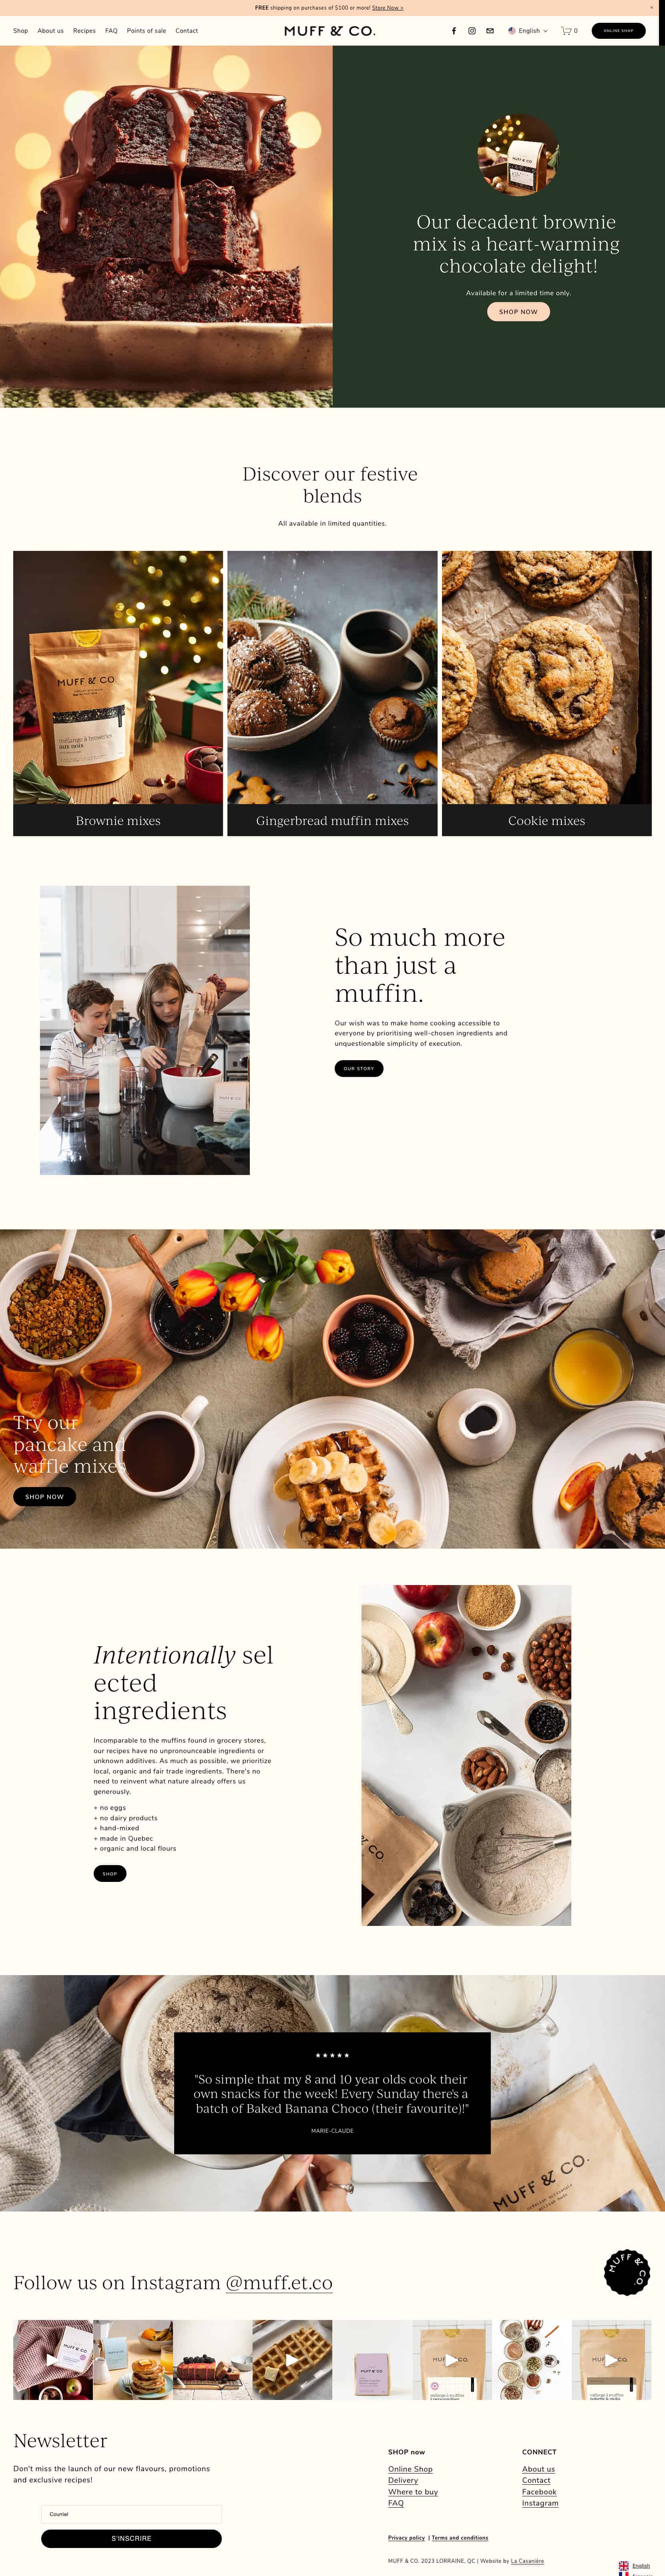 Squarespace Ecommerce Examples 3: Muff&Co - Streamlined UX/UI with a clean and inviting layout